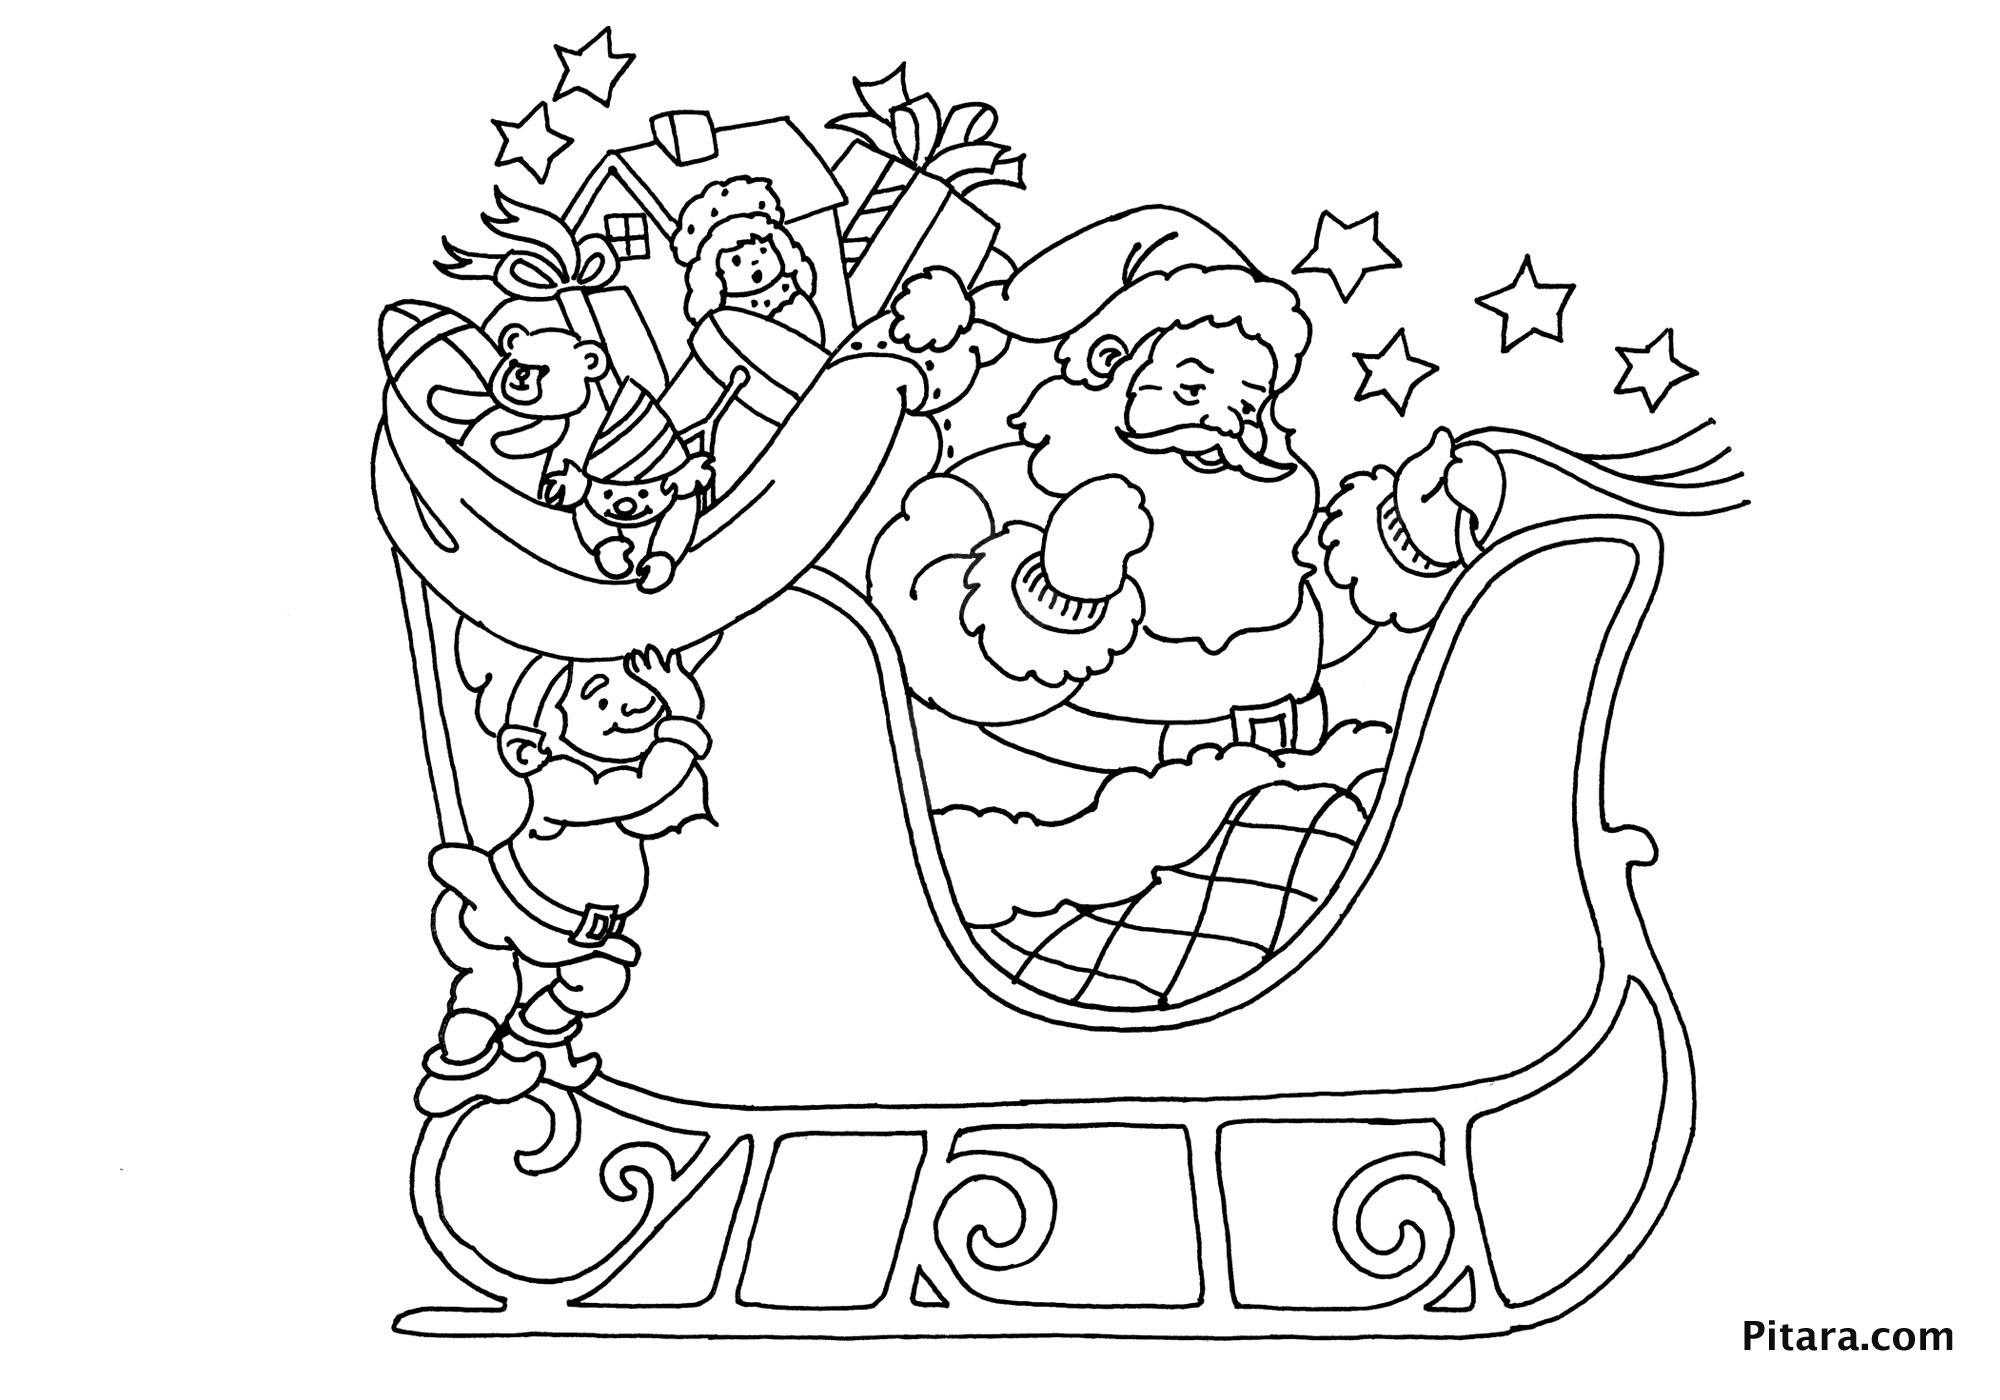 Download Christmas Coloring Pages for Kids | Pitara Kids Network